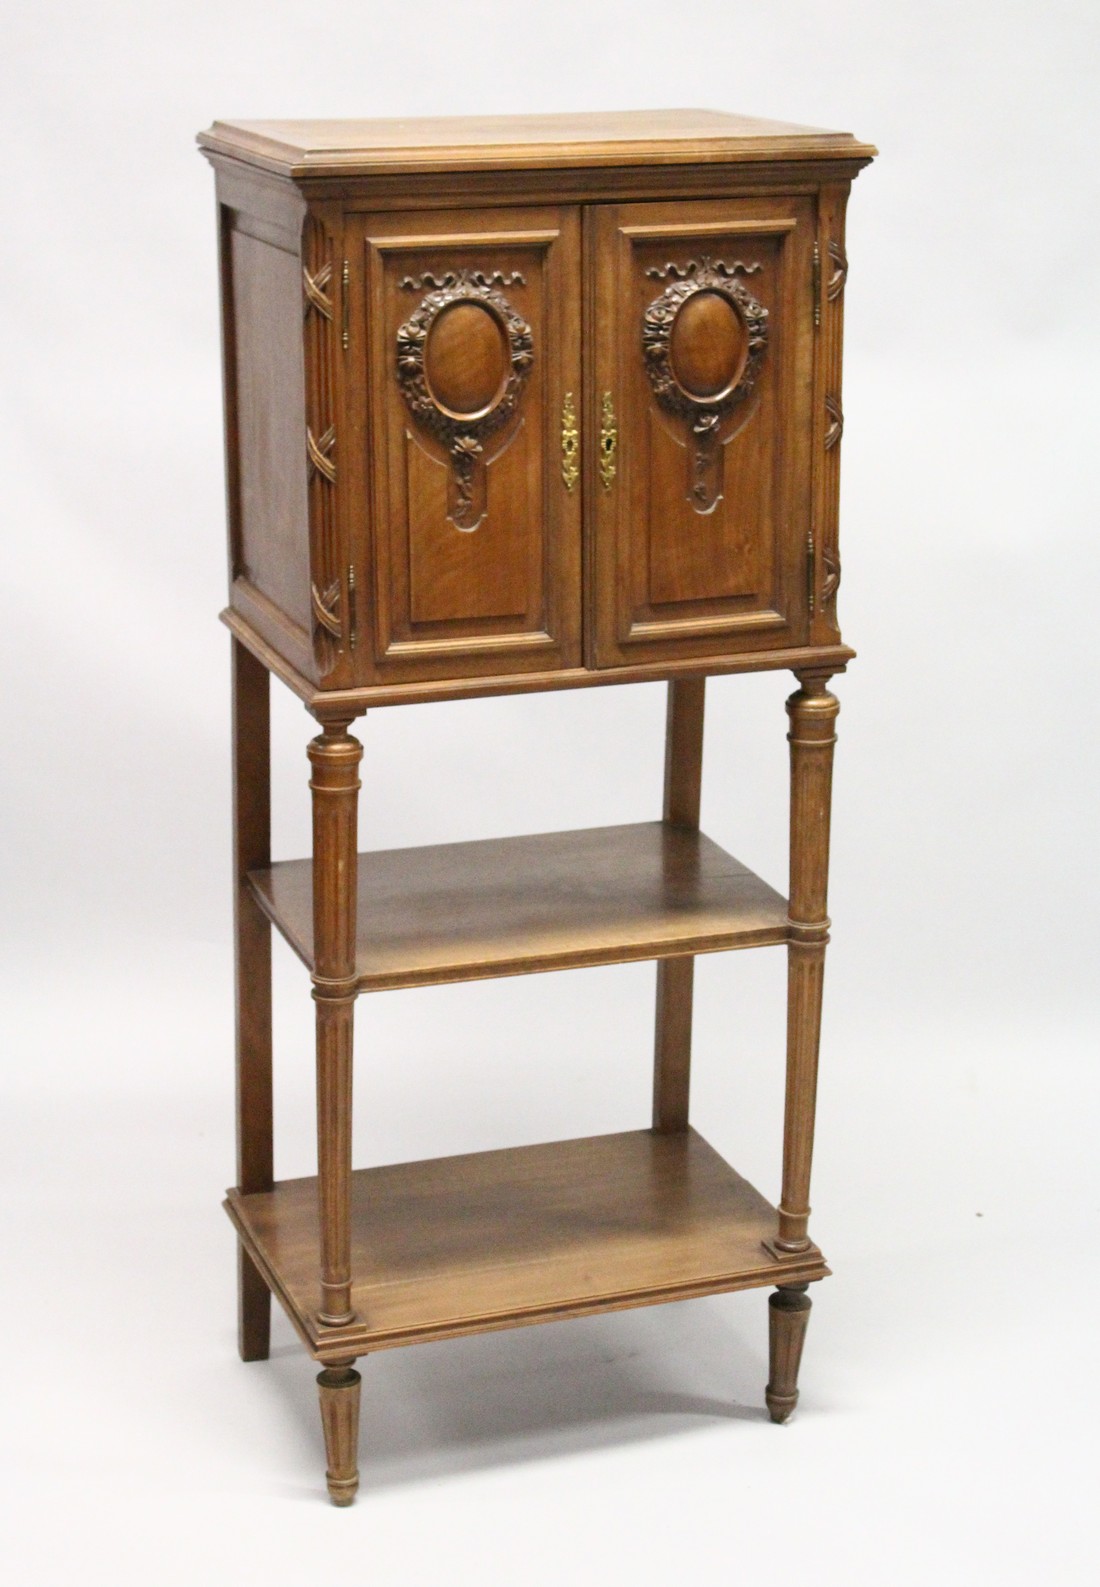 A LATE 19TH CENTURY FRENCH WALNUT MUSIC CABINET, with a pair of carved panelled doors enclosing